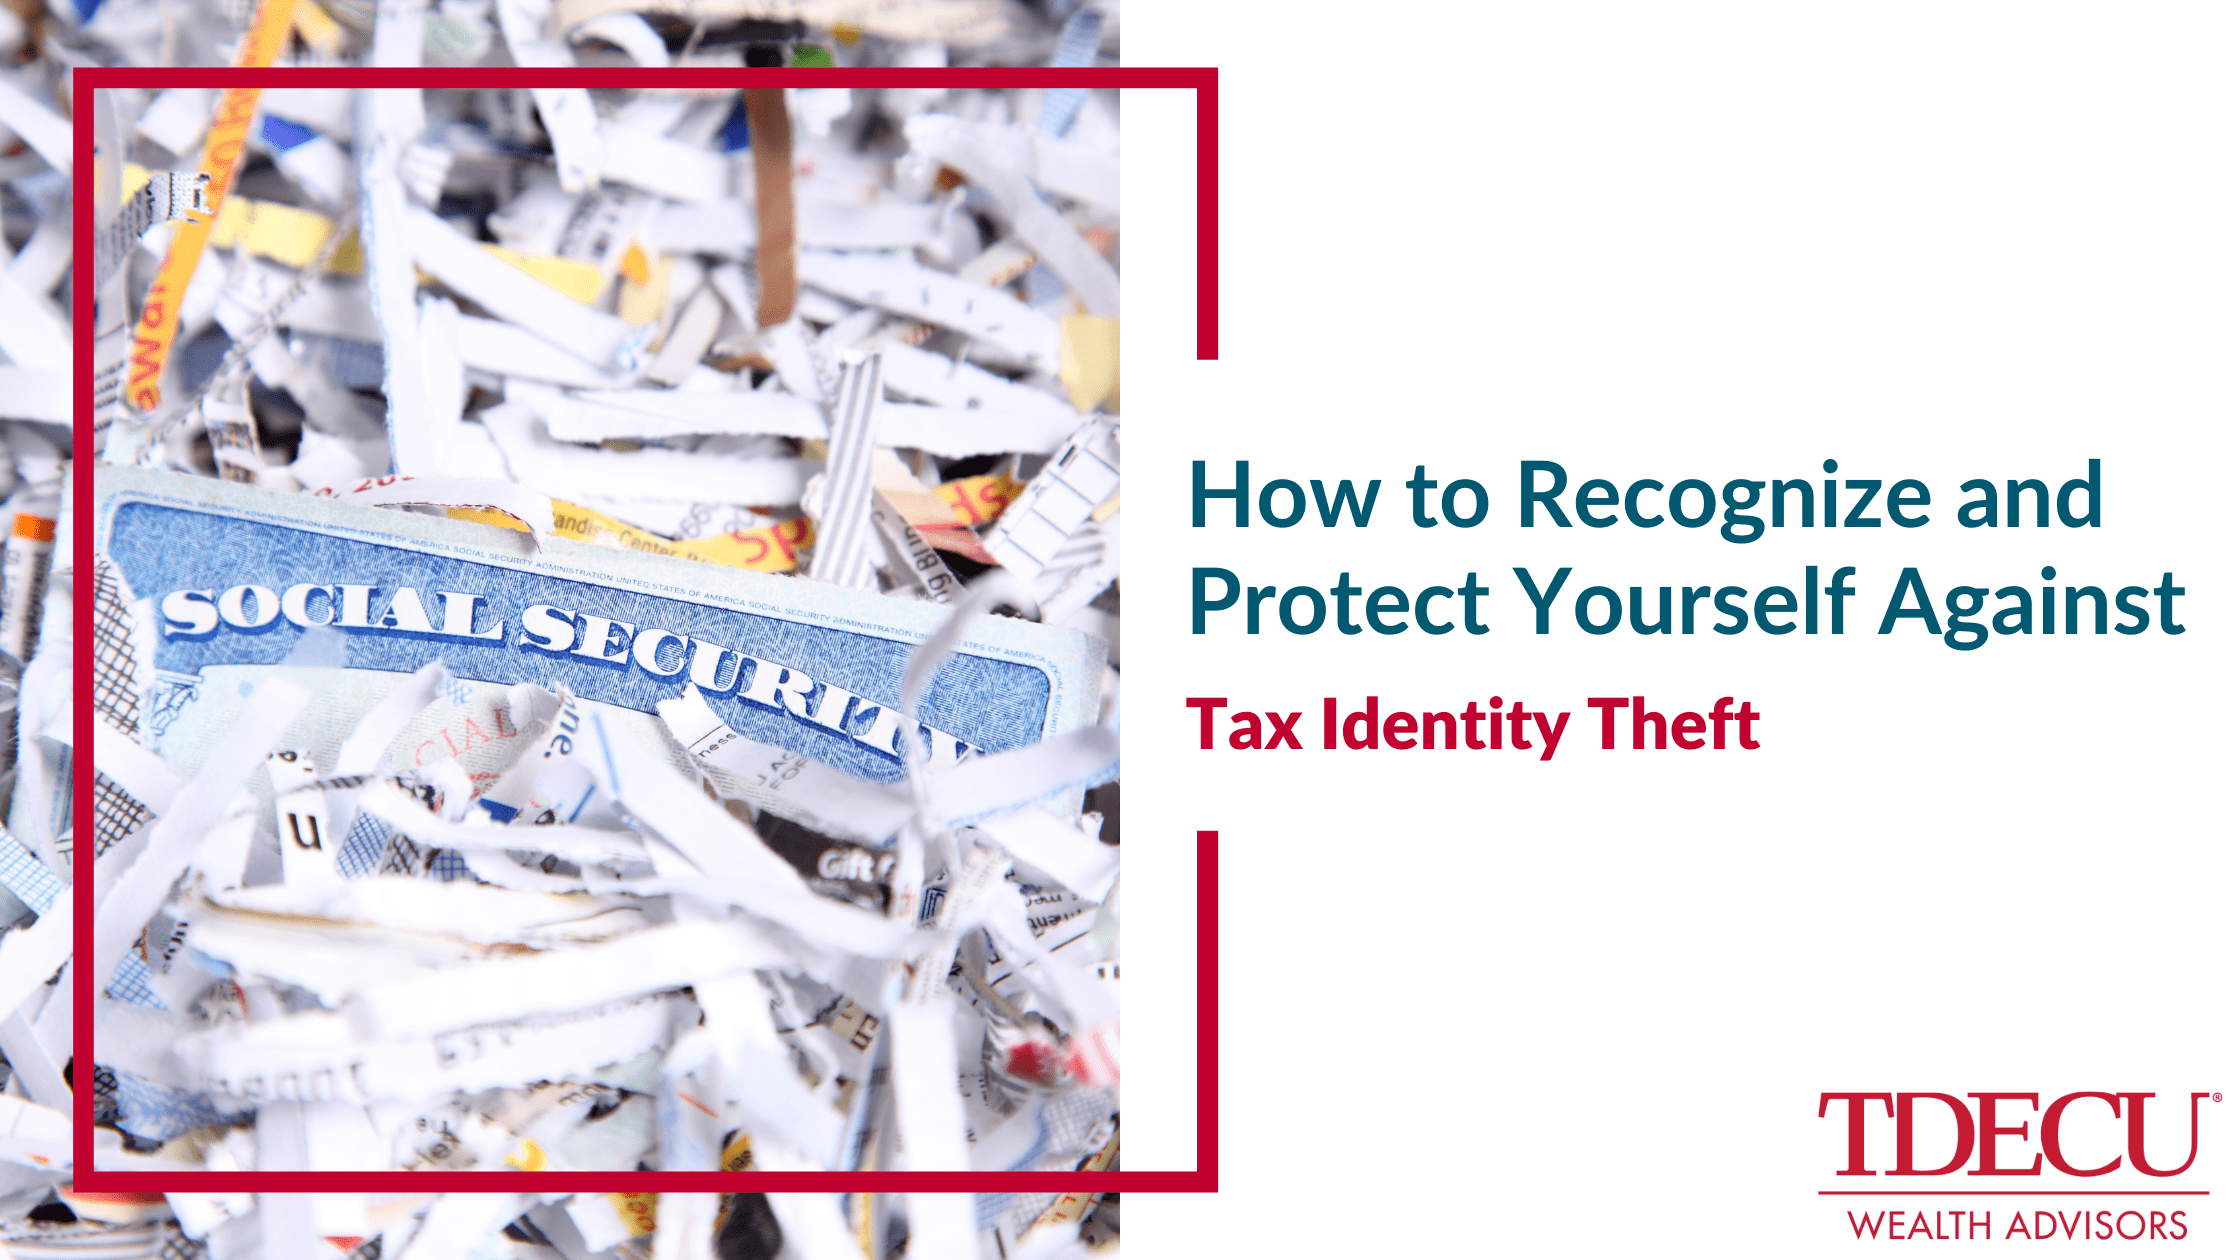 How to Recognize and Protect Yourself Against Tax Identity Theft